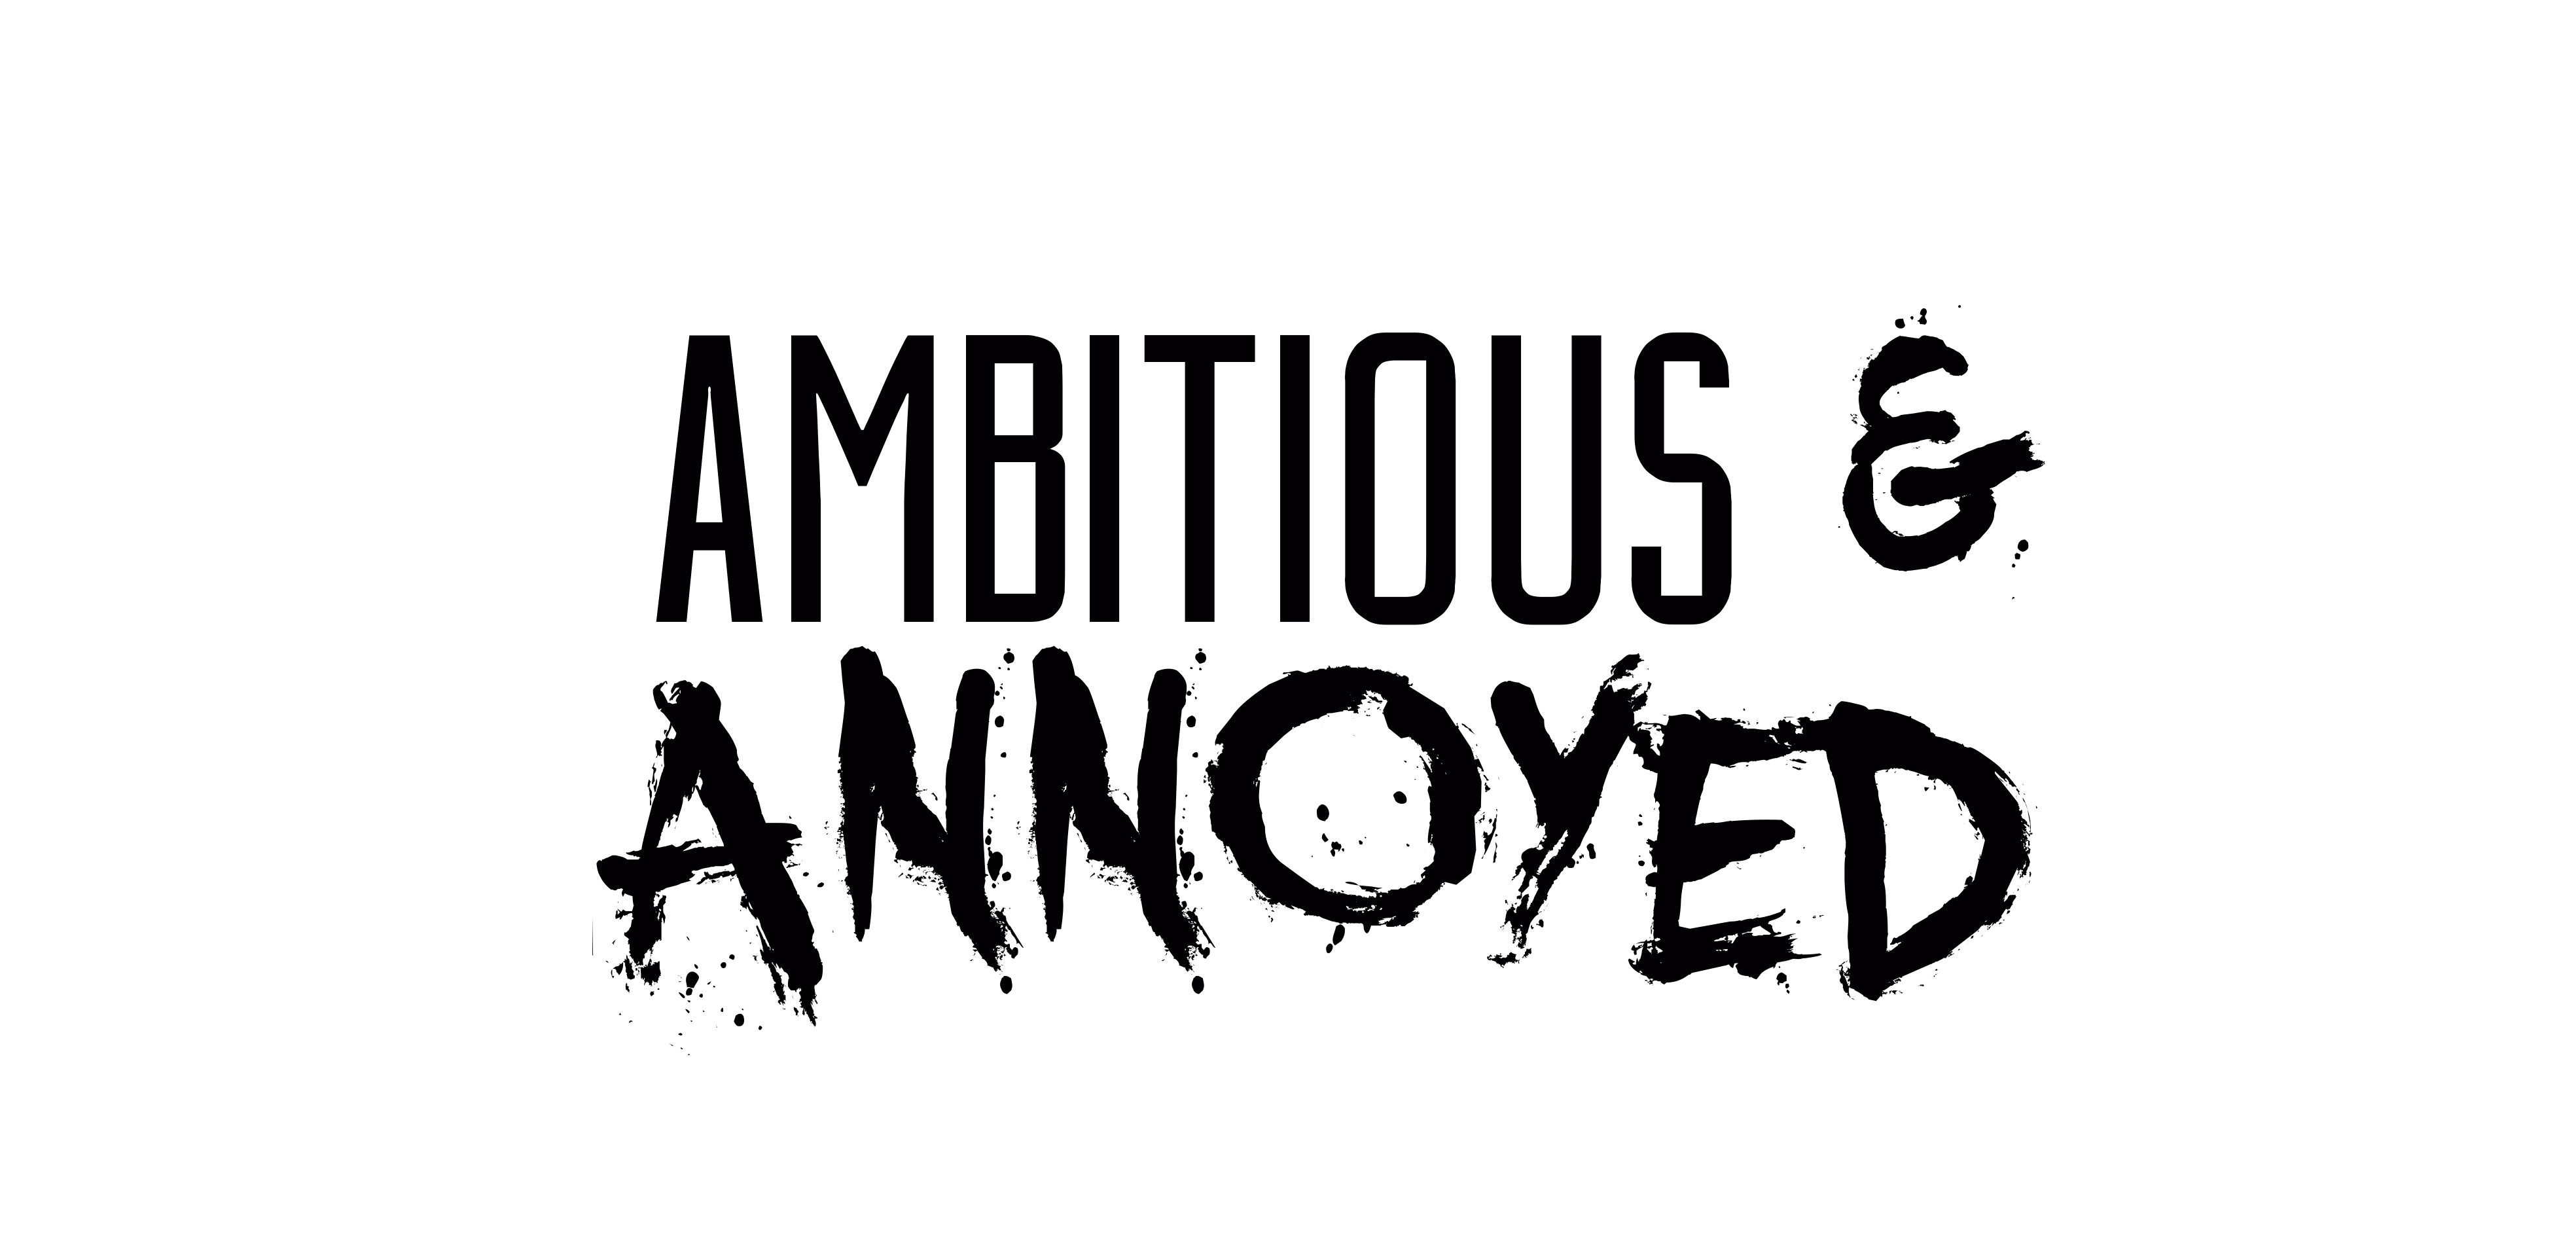 Ambitious Logo - Ambitious & Annoyed. Turning Annoyances into Fuel for Your Ambitions